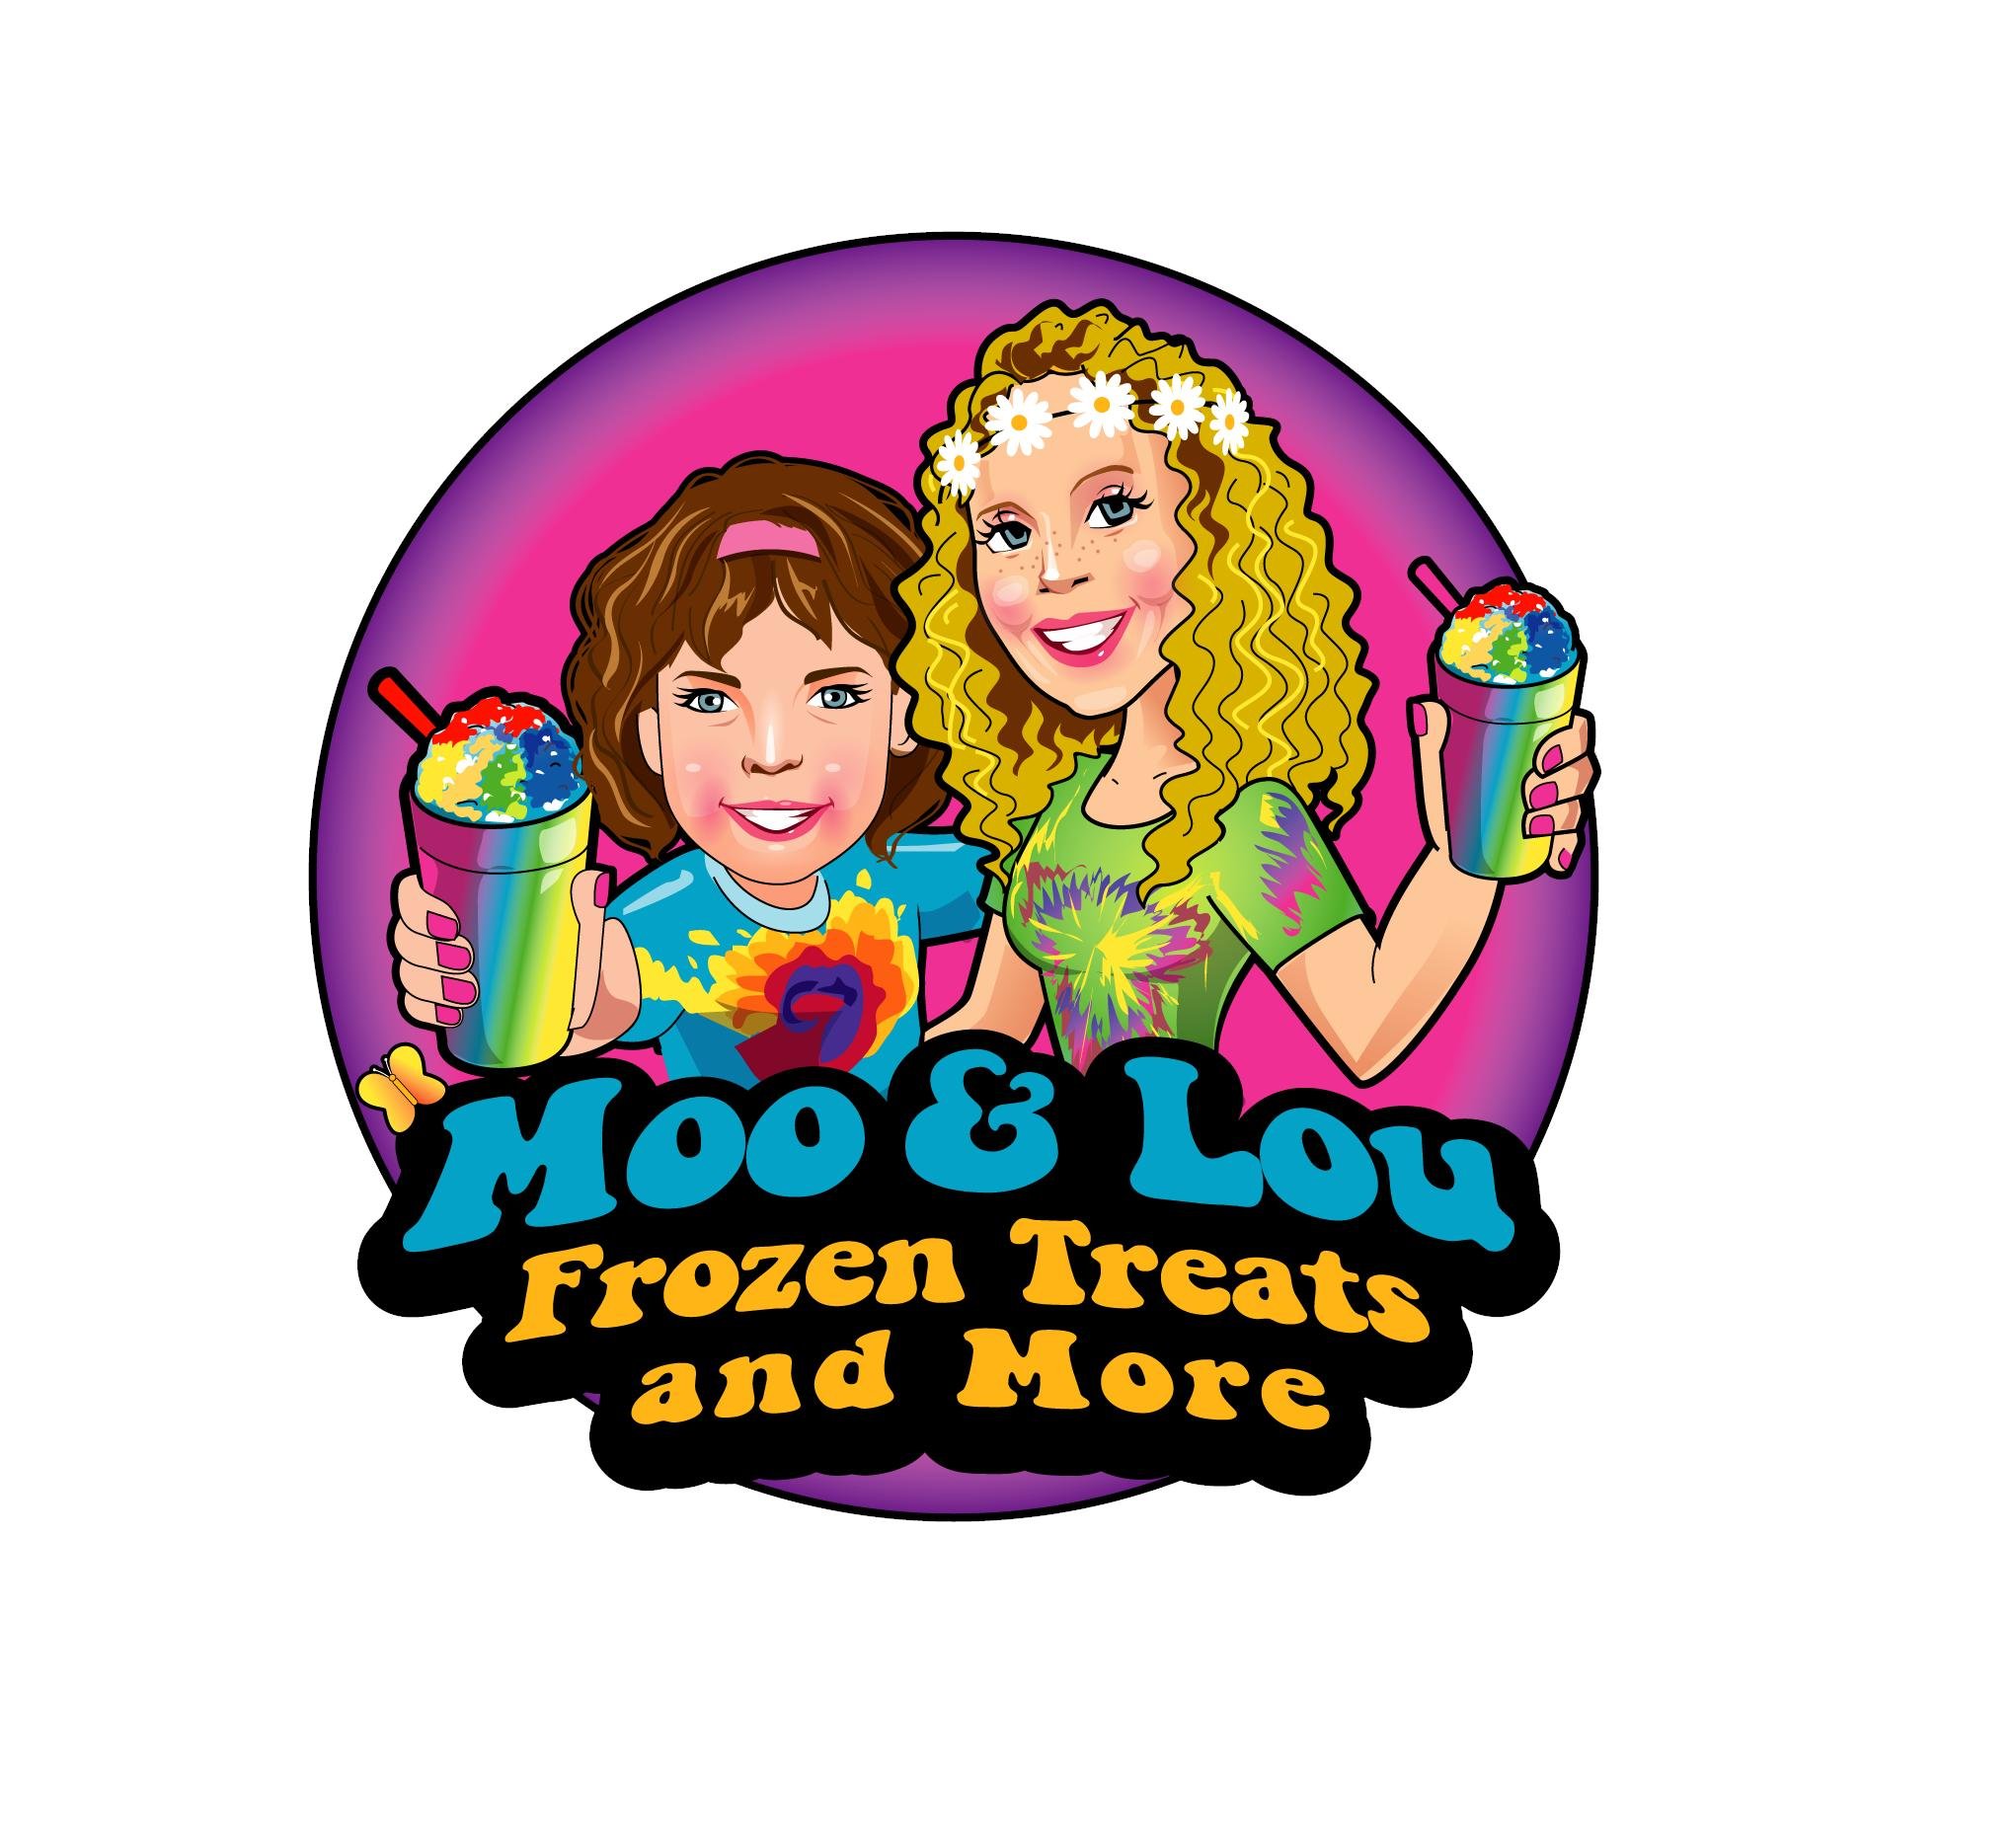 Moo & Lou Frozen Treats go hand in hand with our Non-Profit, Maddie Smiles Inc.  A percentage of every sale will help spread kindness in our community! :)